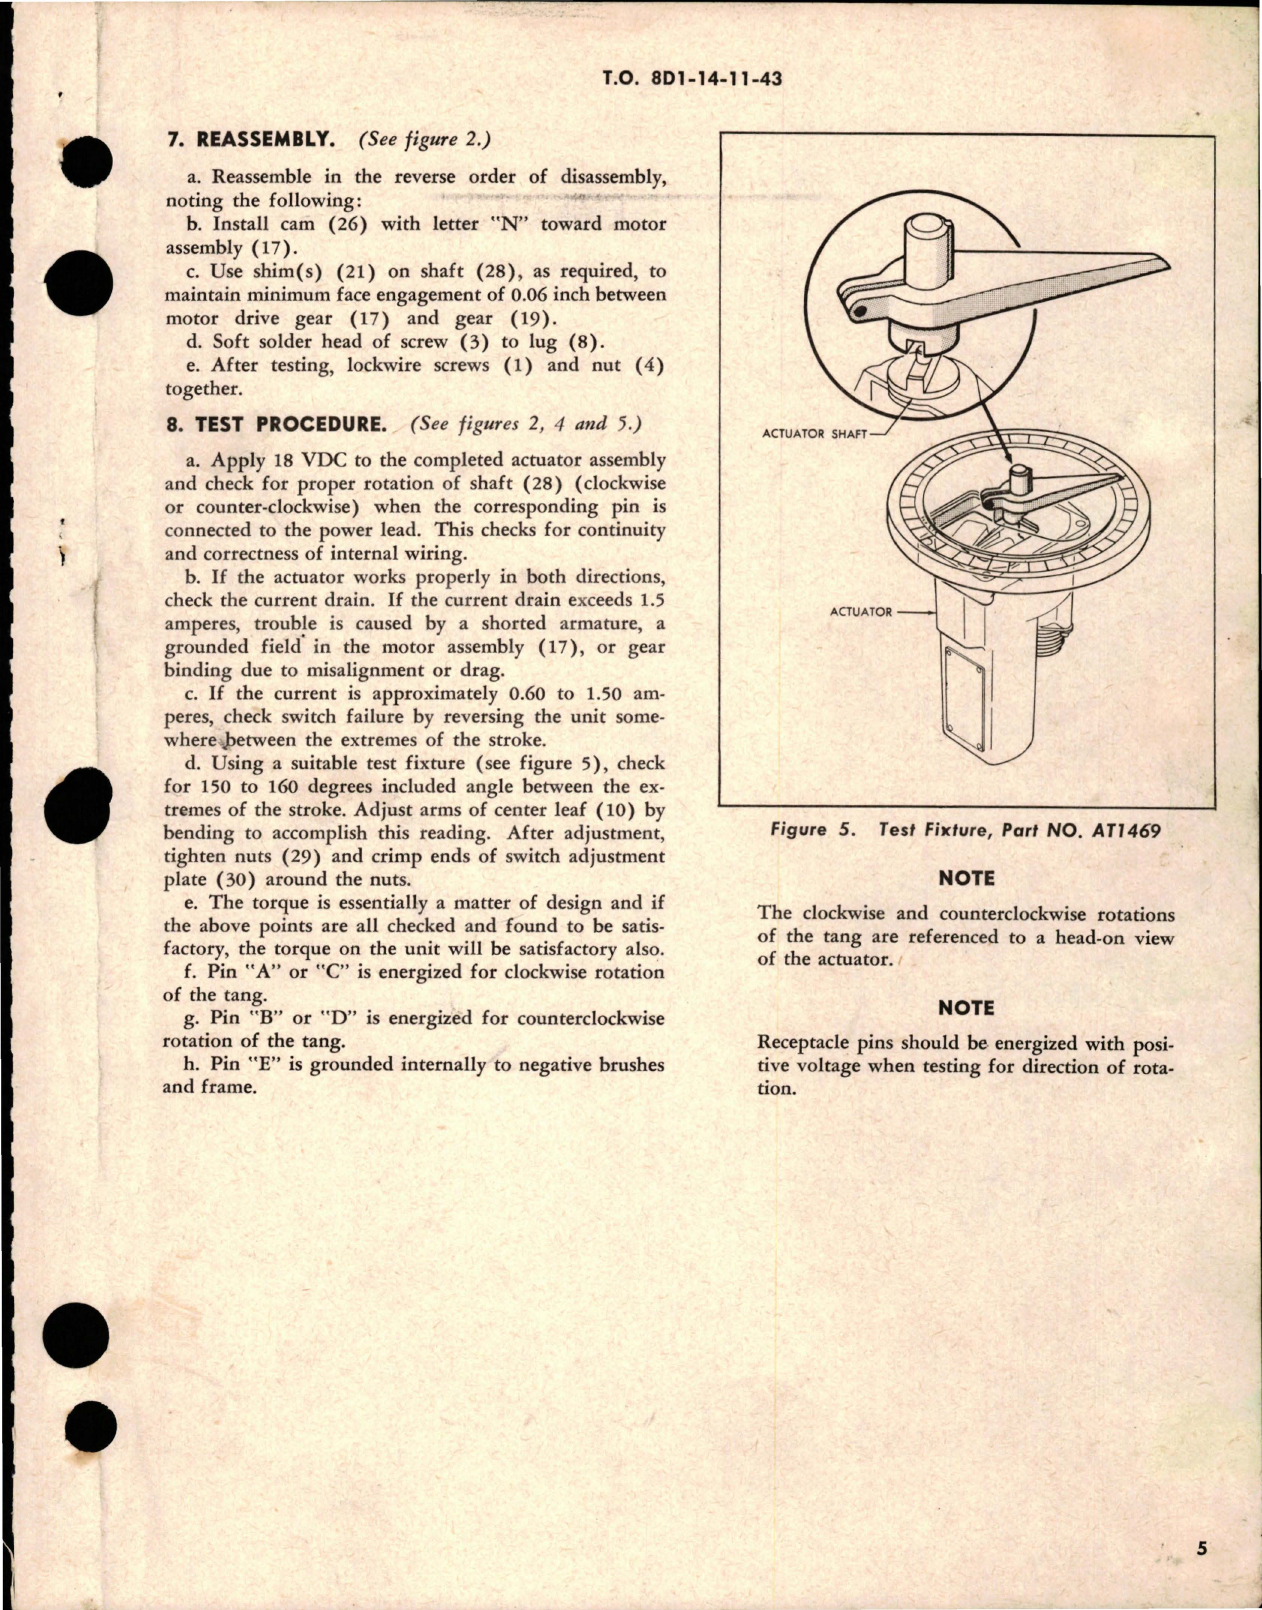 Sample page 5 from AirCorps Library document: Overhaul with Parts Breakdown for Actuator Assembly - Part WA8003